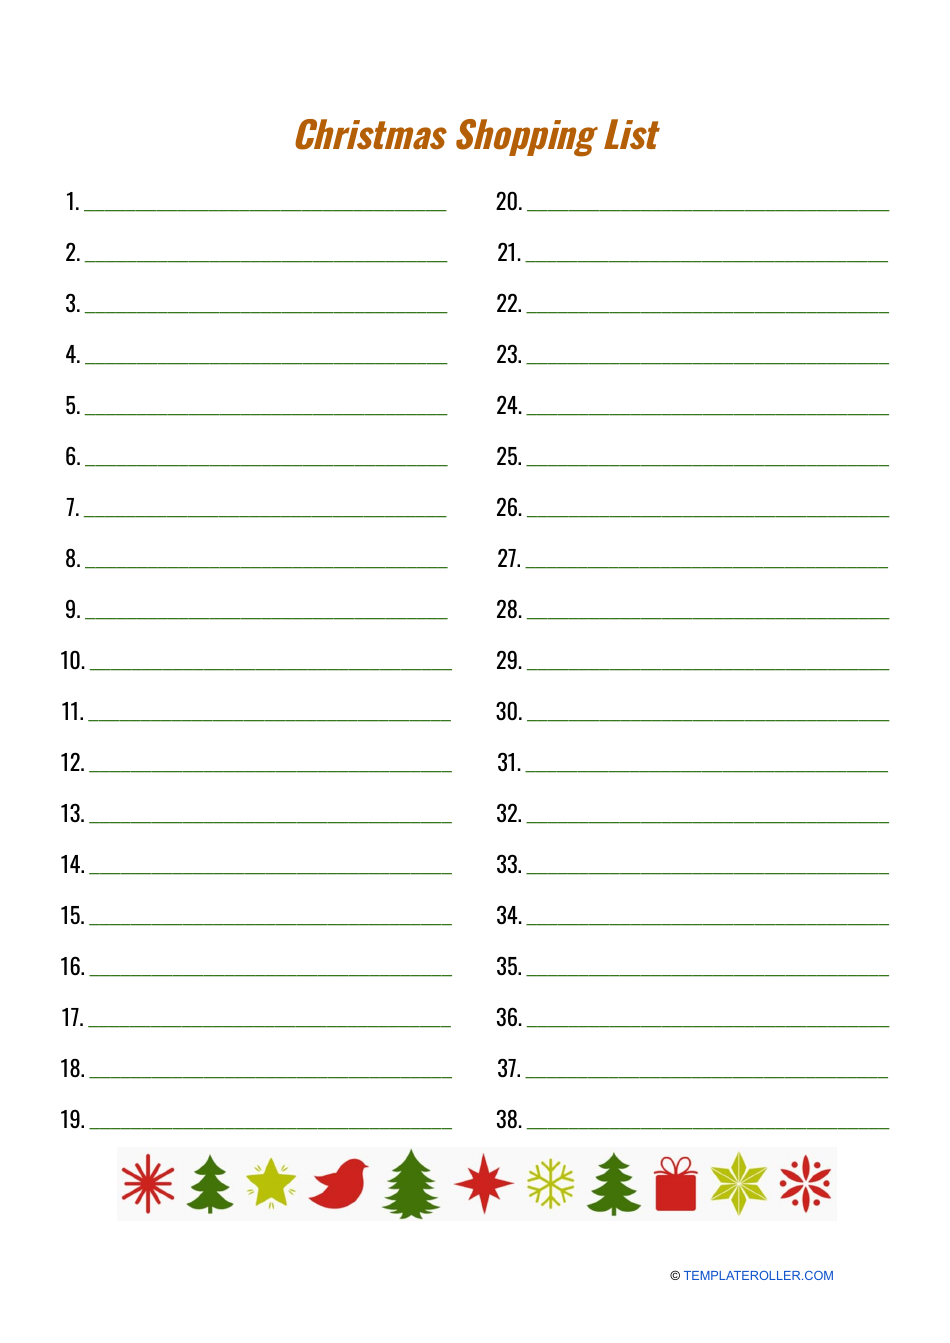 Christmas Shopping List Template with Thirty Eight Points